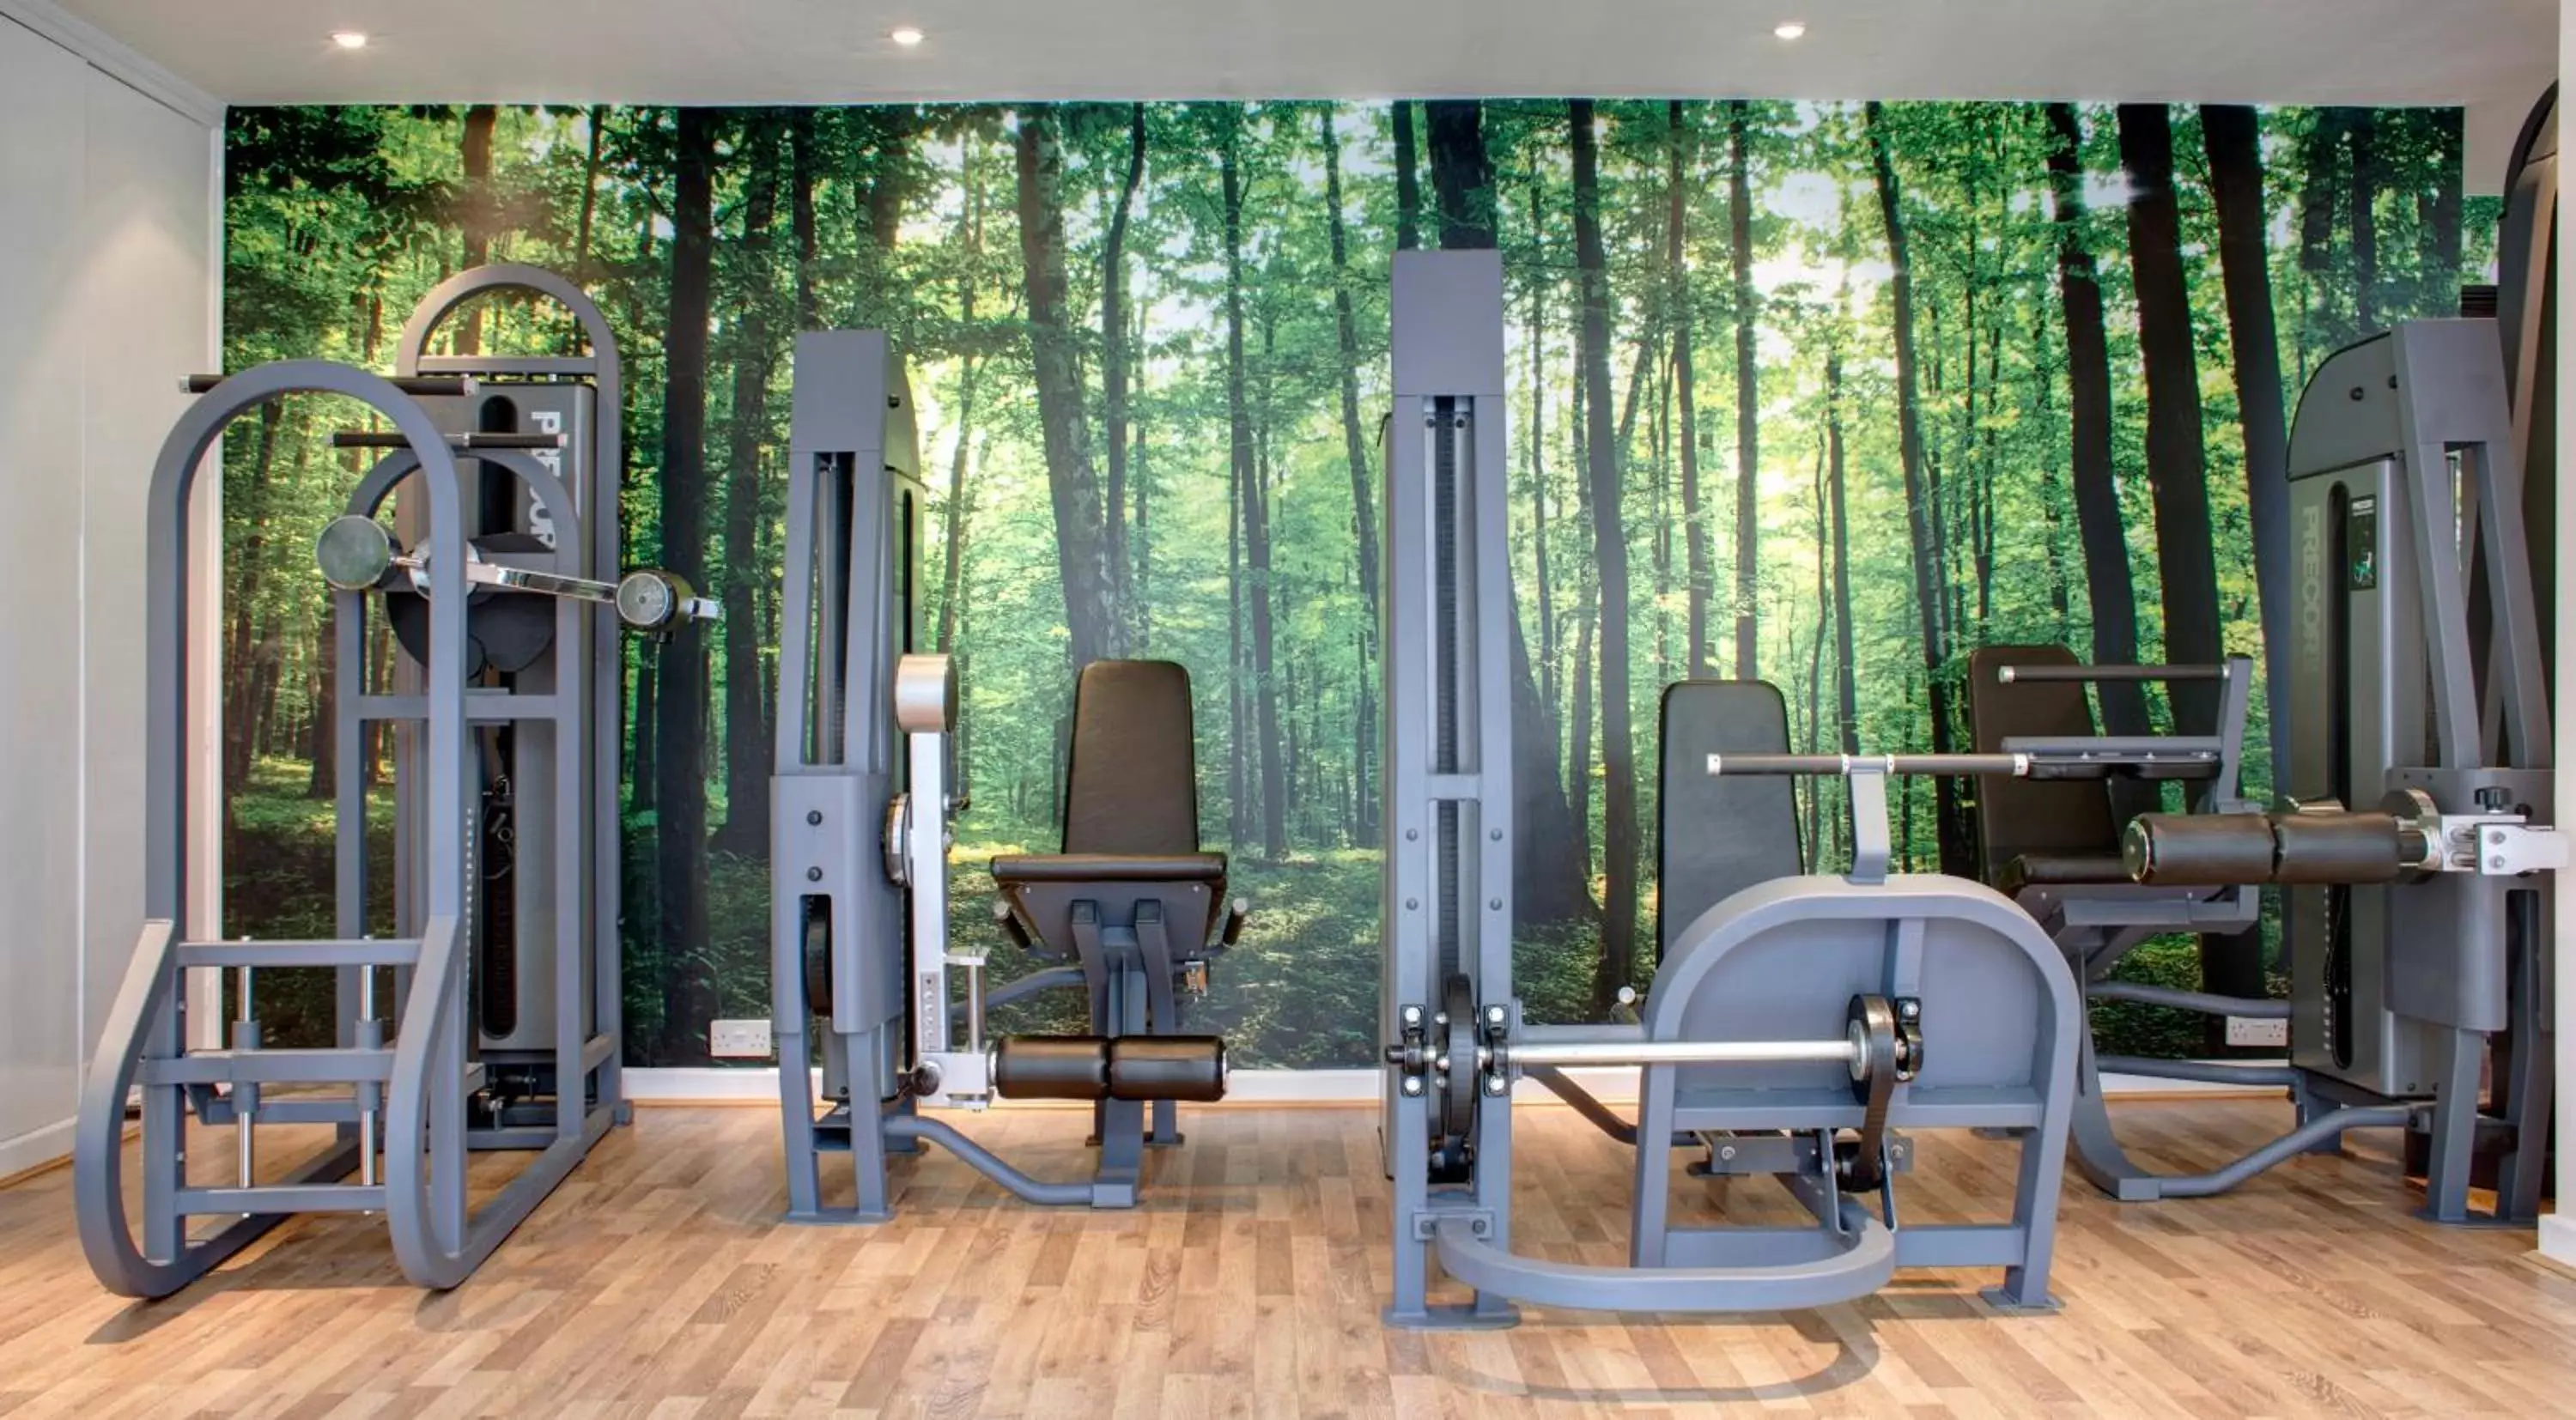 Fitness centre/facilities, Fitness Center/Facilities in Park Plaza Leeds